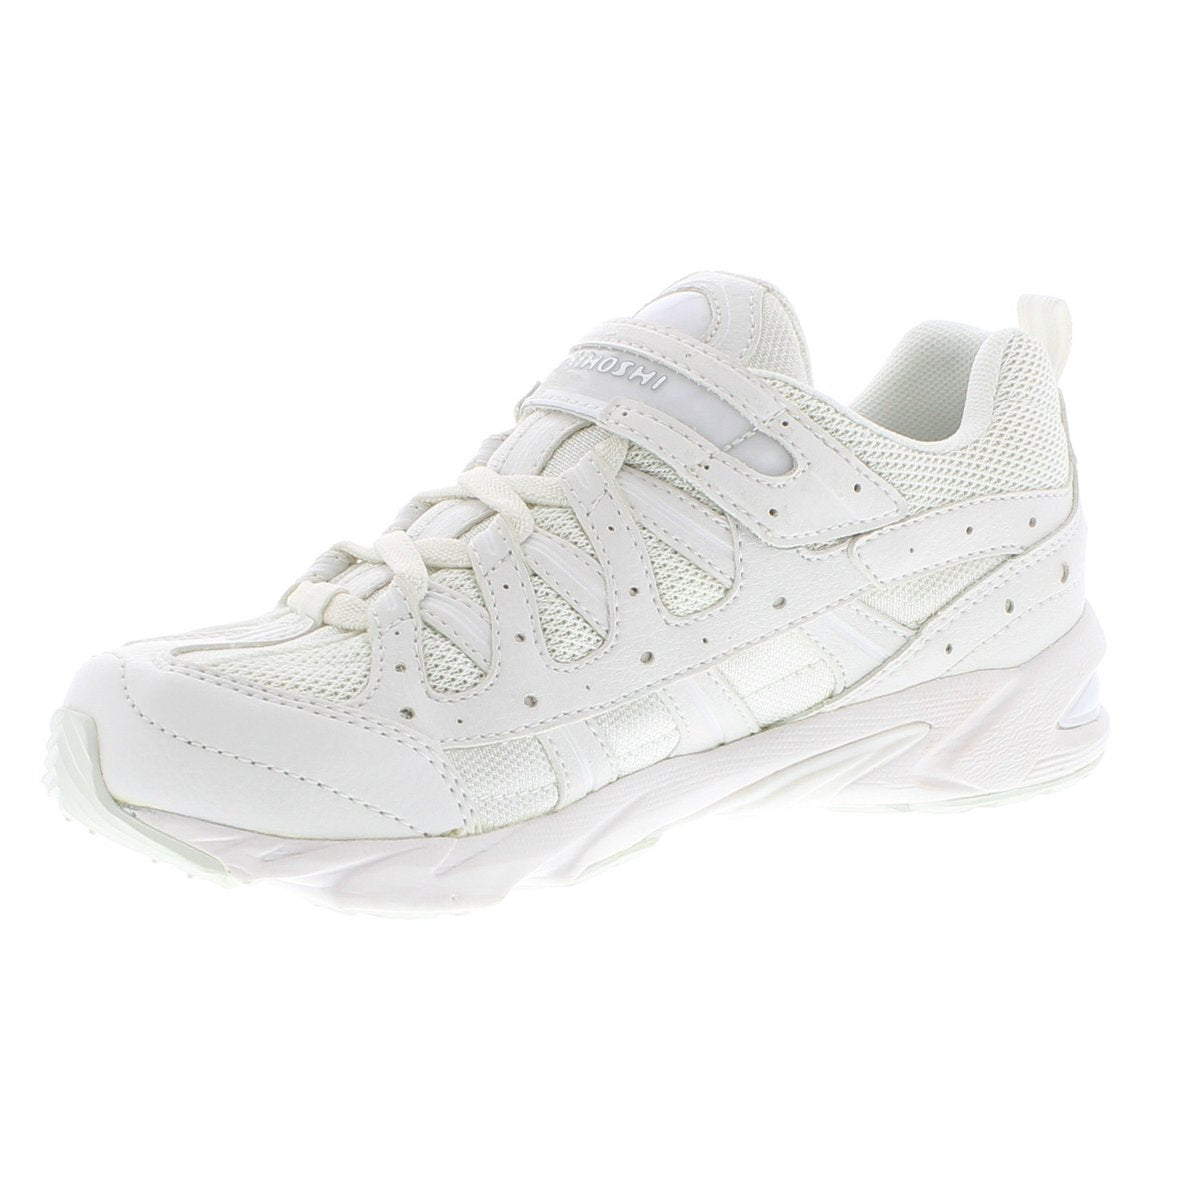 Youth Tsukihoshi Speed Sneaker in White/White from the front view